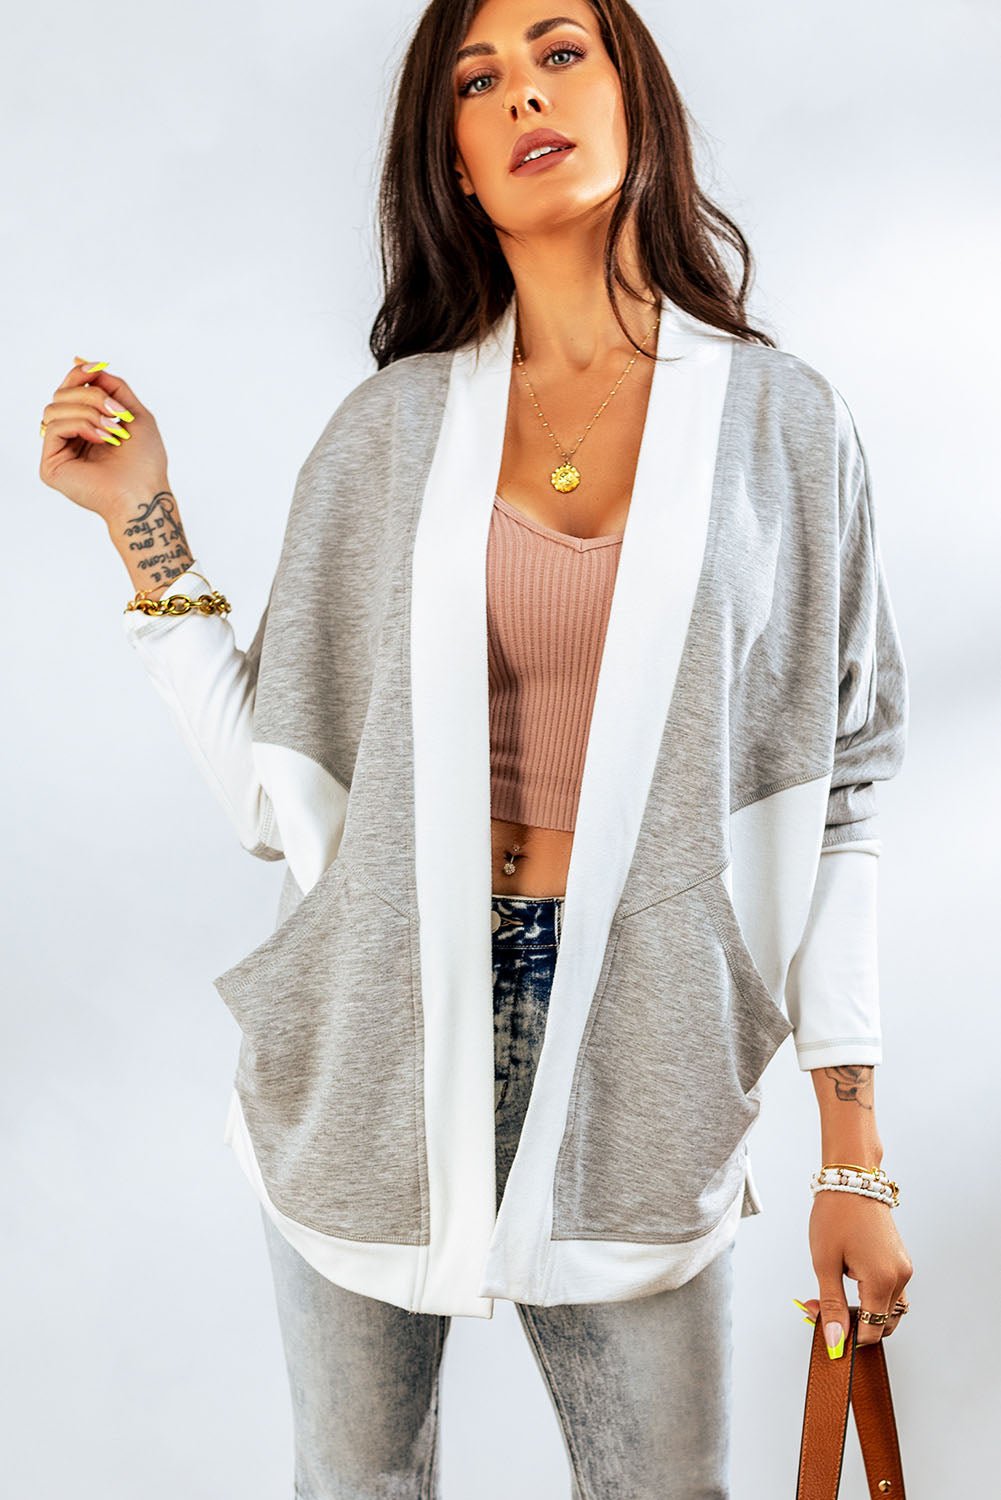 Indulge in Luxurious Comfort with our Contrast Open Front Cardigan - Wrap yourself in romance and elegance with this versatile piece that transitions from day to night effortlessly - Feel confident and stylish all day long. - Guy Christopher